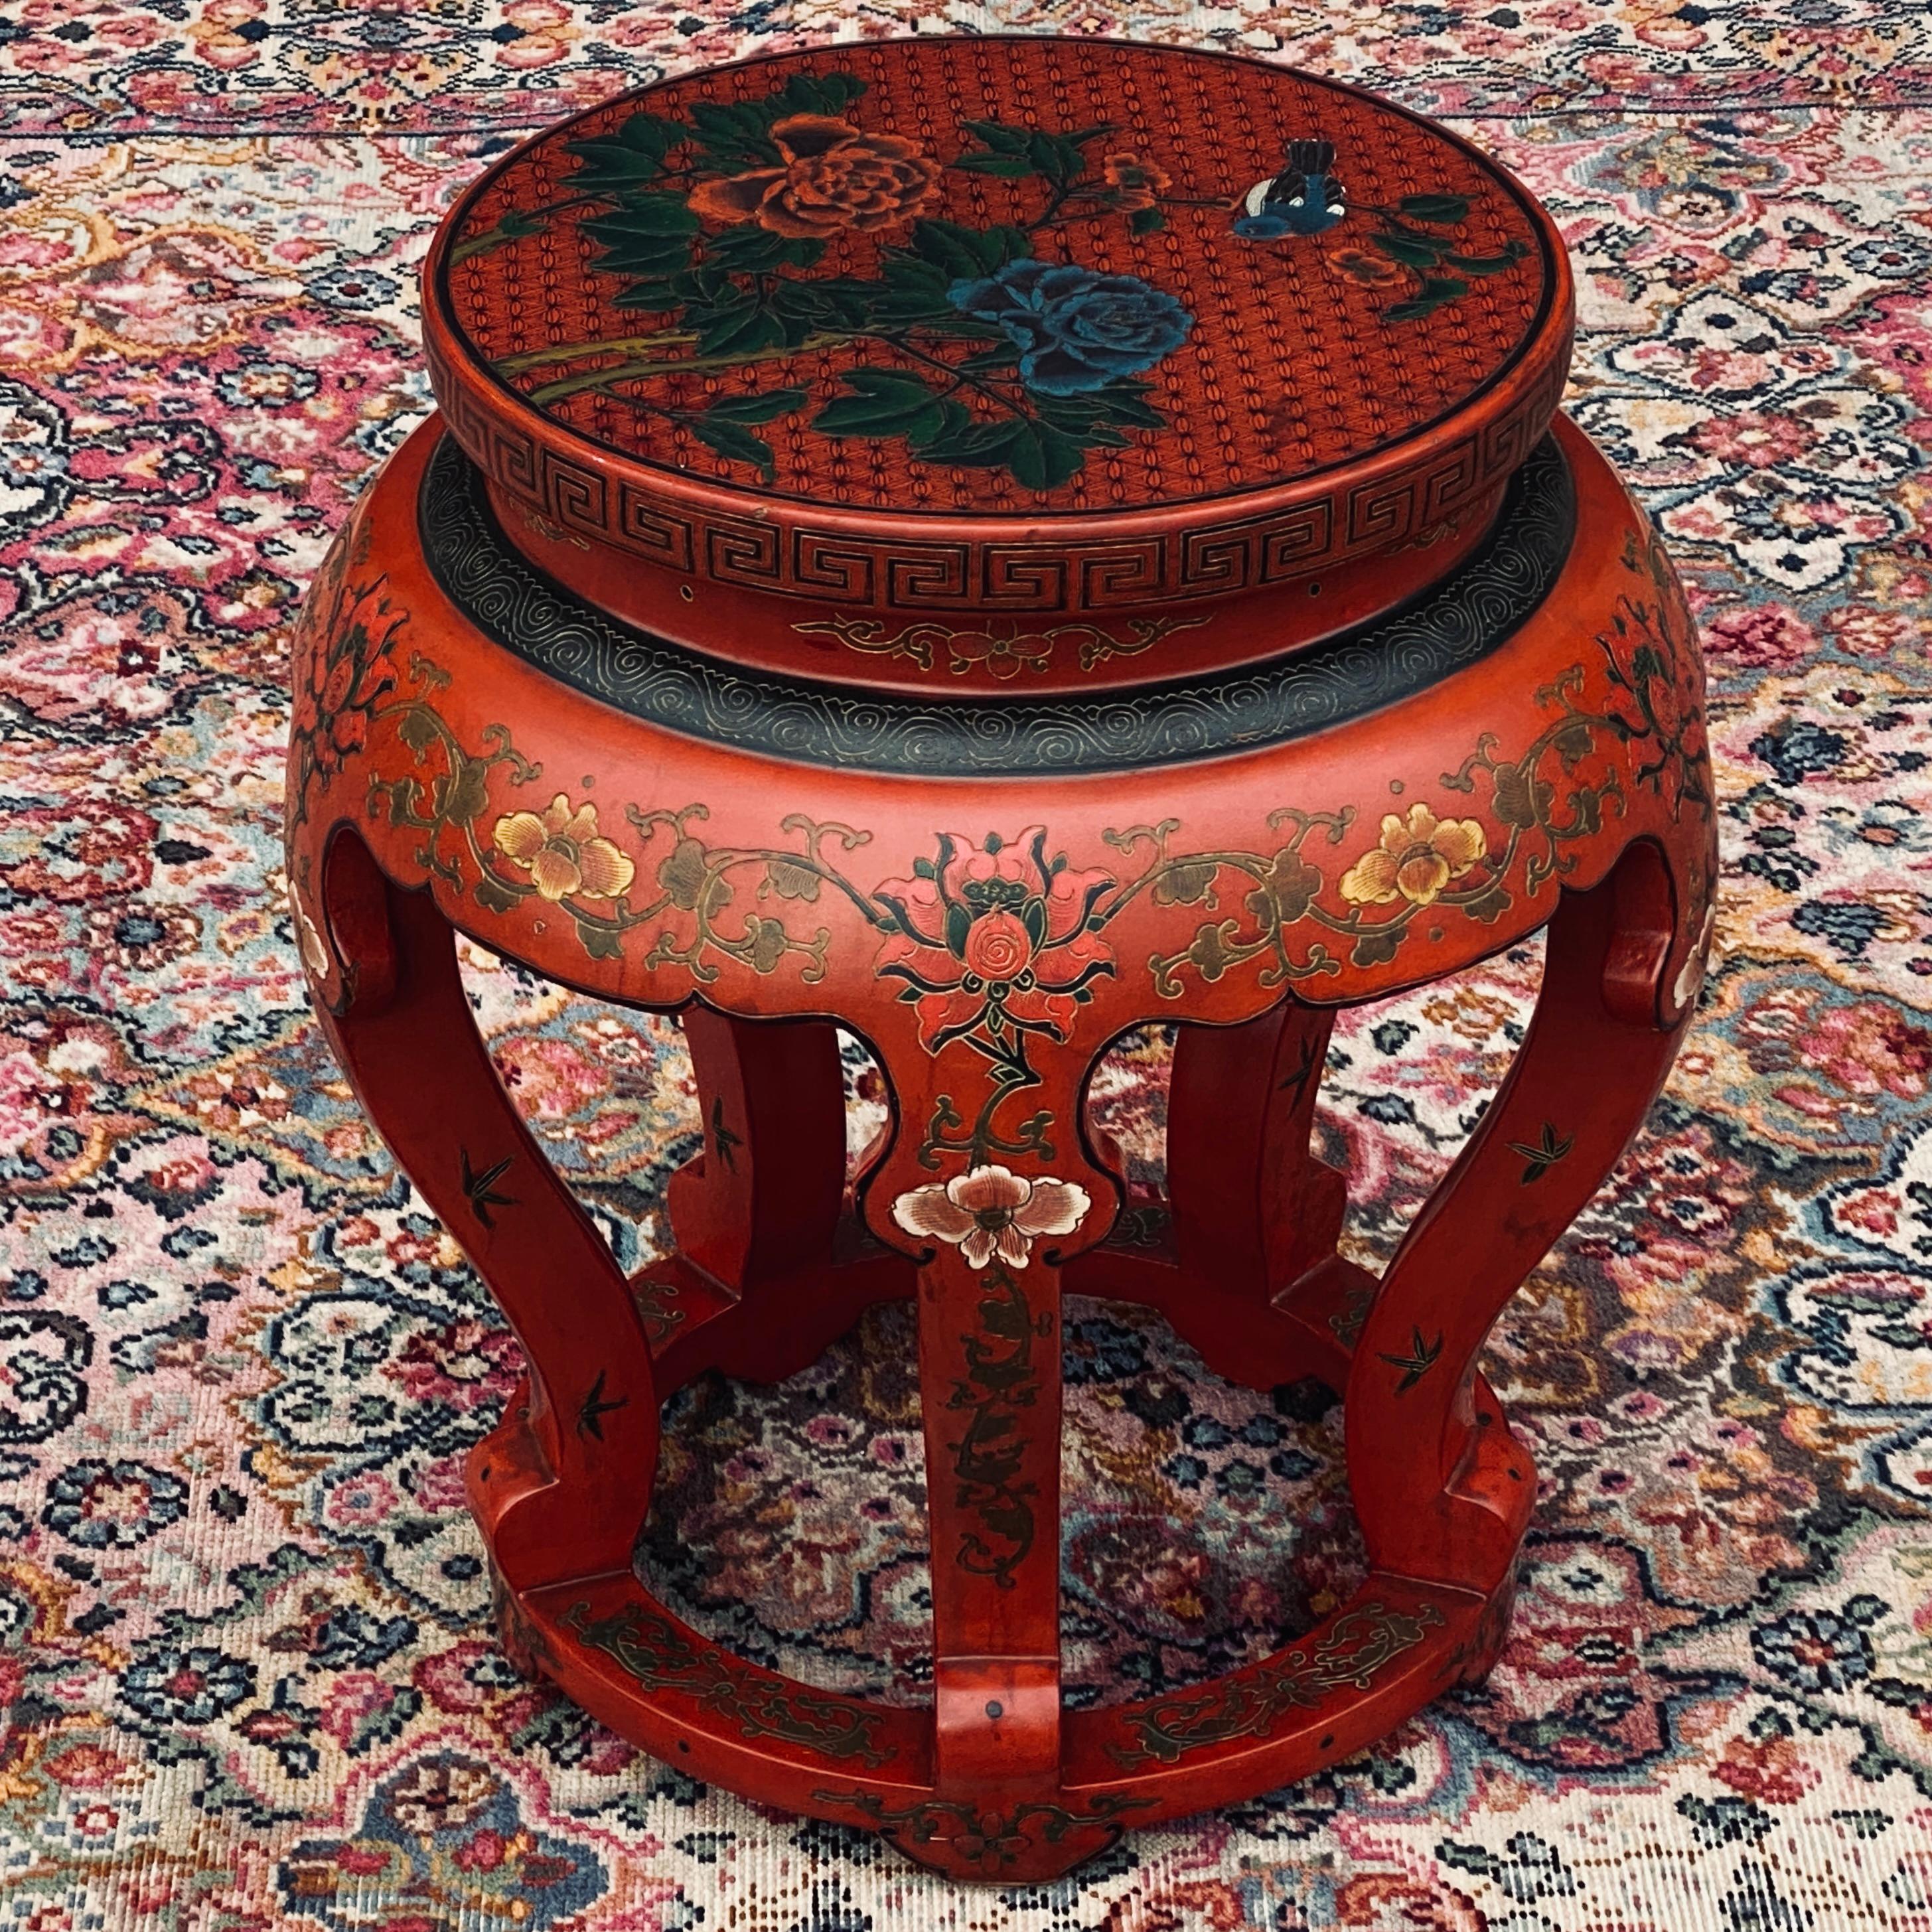 Deep red lacquer Chinese stool or side table decorated with chrysanthemums, scrolling flowers, and a greek key pattern. Five ruyi-style legs with further hand painted flowers on each. Great accent piece that will enhance any room either as a side